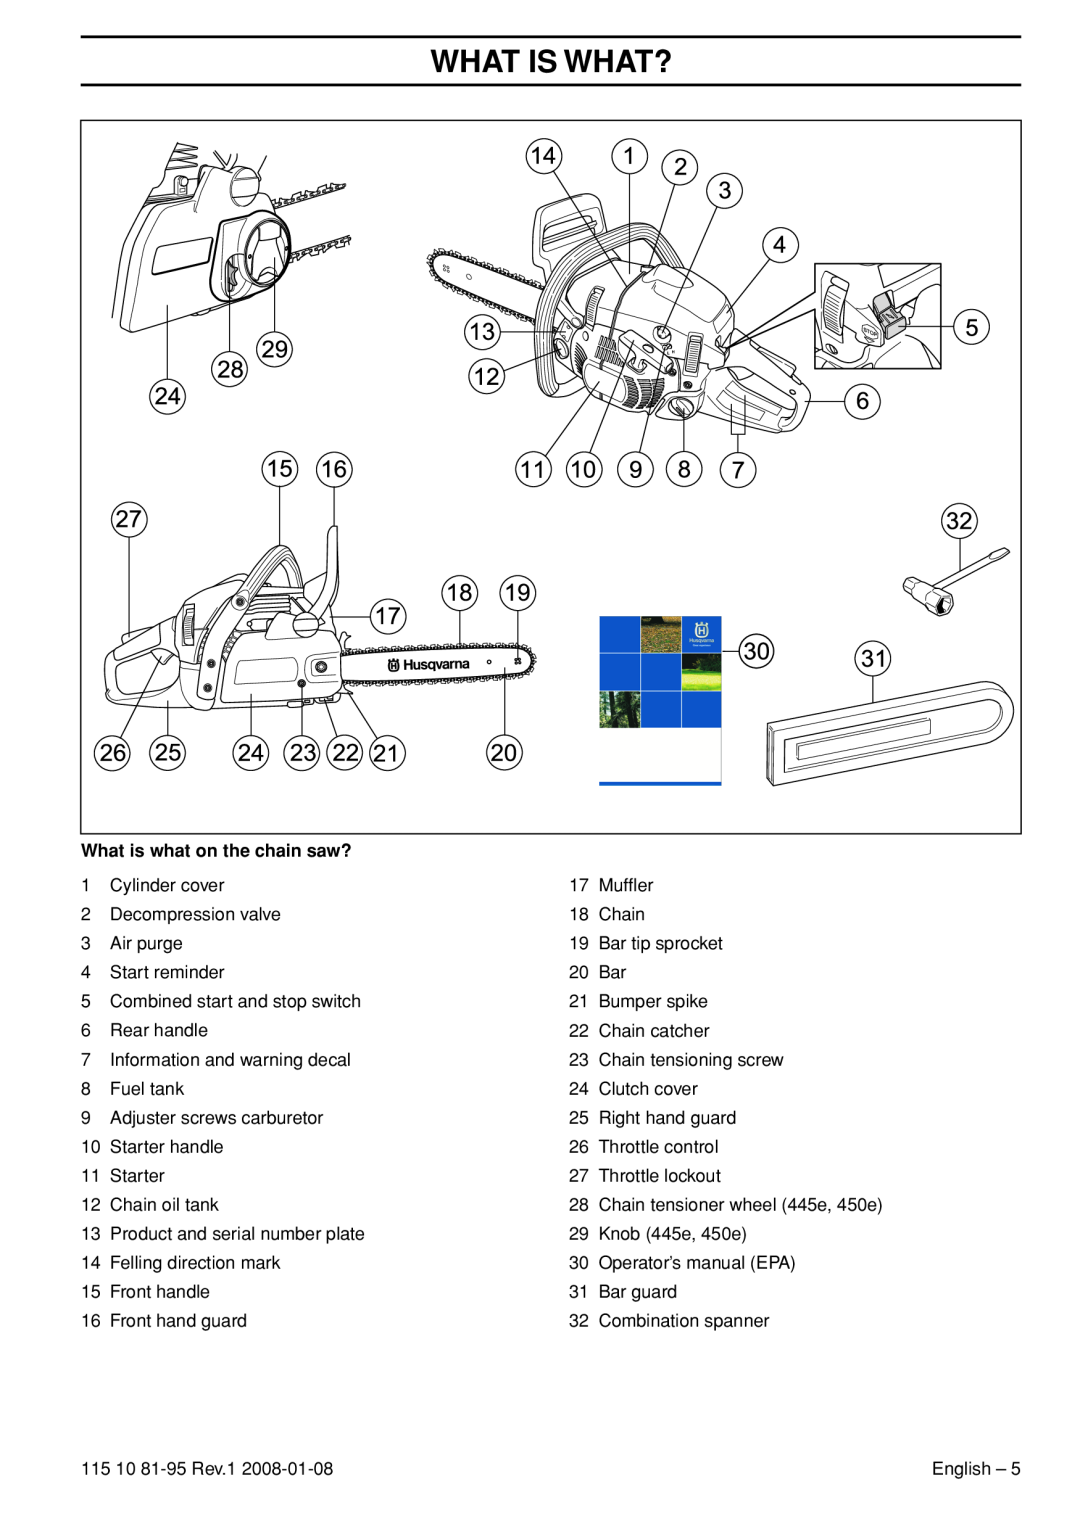 Husqvarna 440e, 435e manual What Is What?, What is what on the chain saw? 